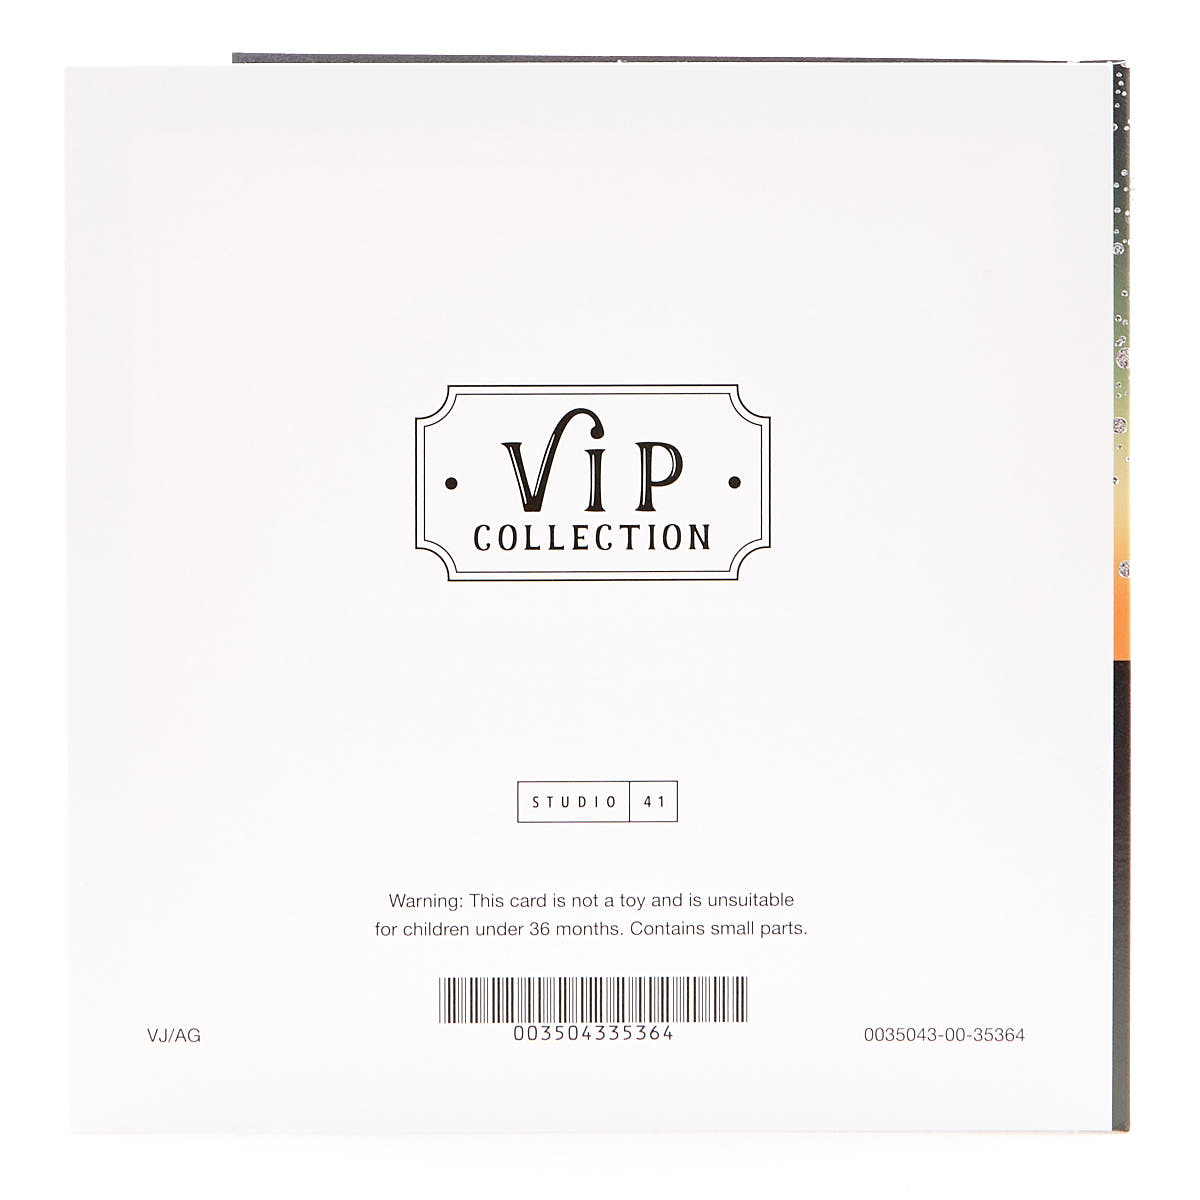 VIP Collection Birthday Card - Son In Law, Supercar